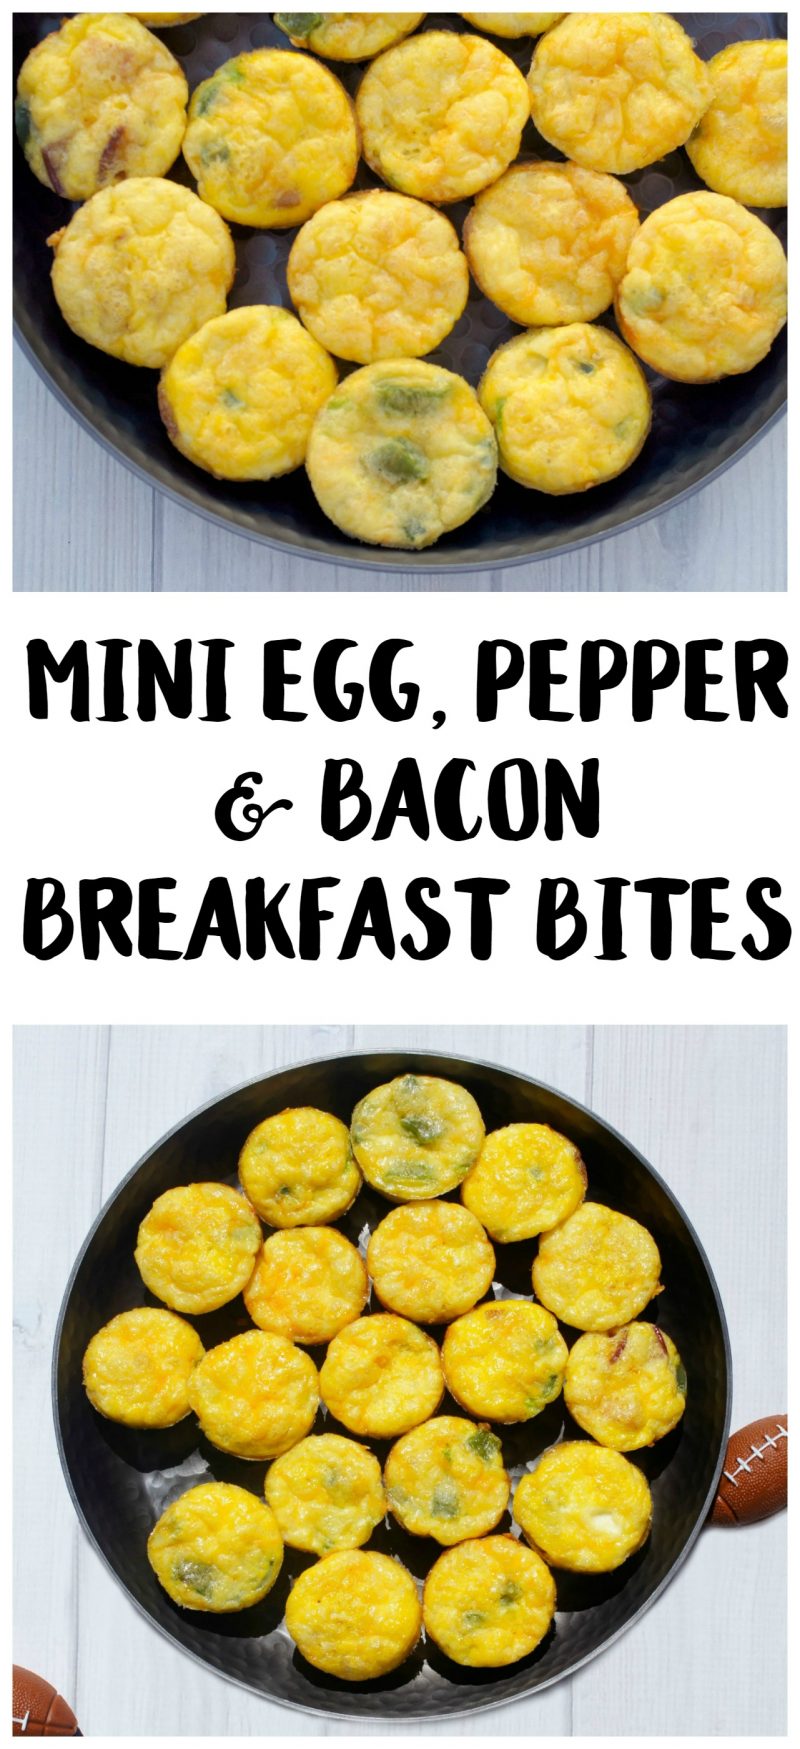 Whether you’re looking for make ahead healthy breakfast options or serving up appetizers for a football party, you have to try these Mini Breakfast Bites! They are made with egg, bacon, and veggies in mini muffin tins and are so easy to make and to customize!